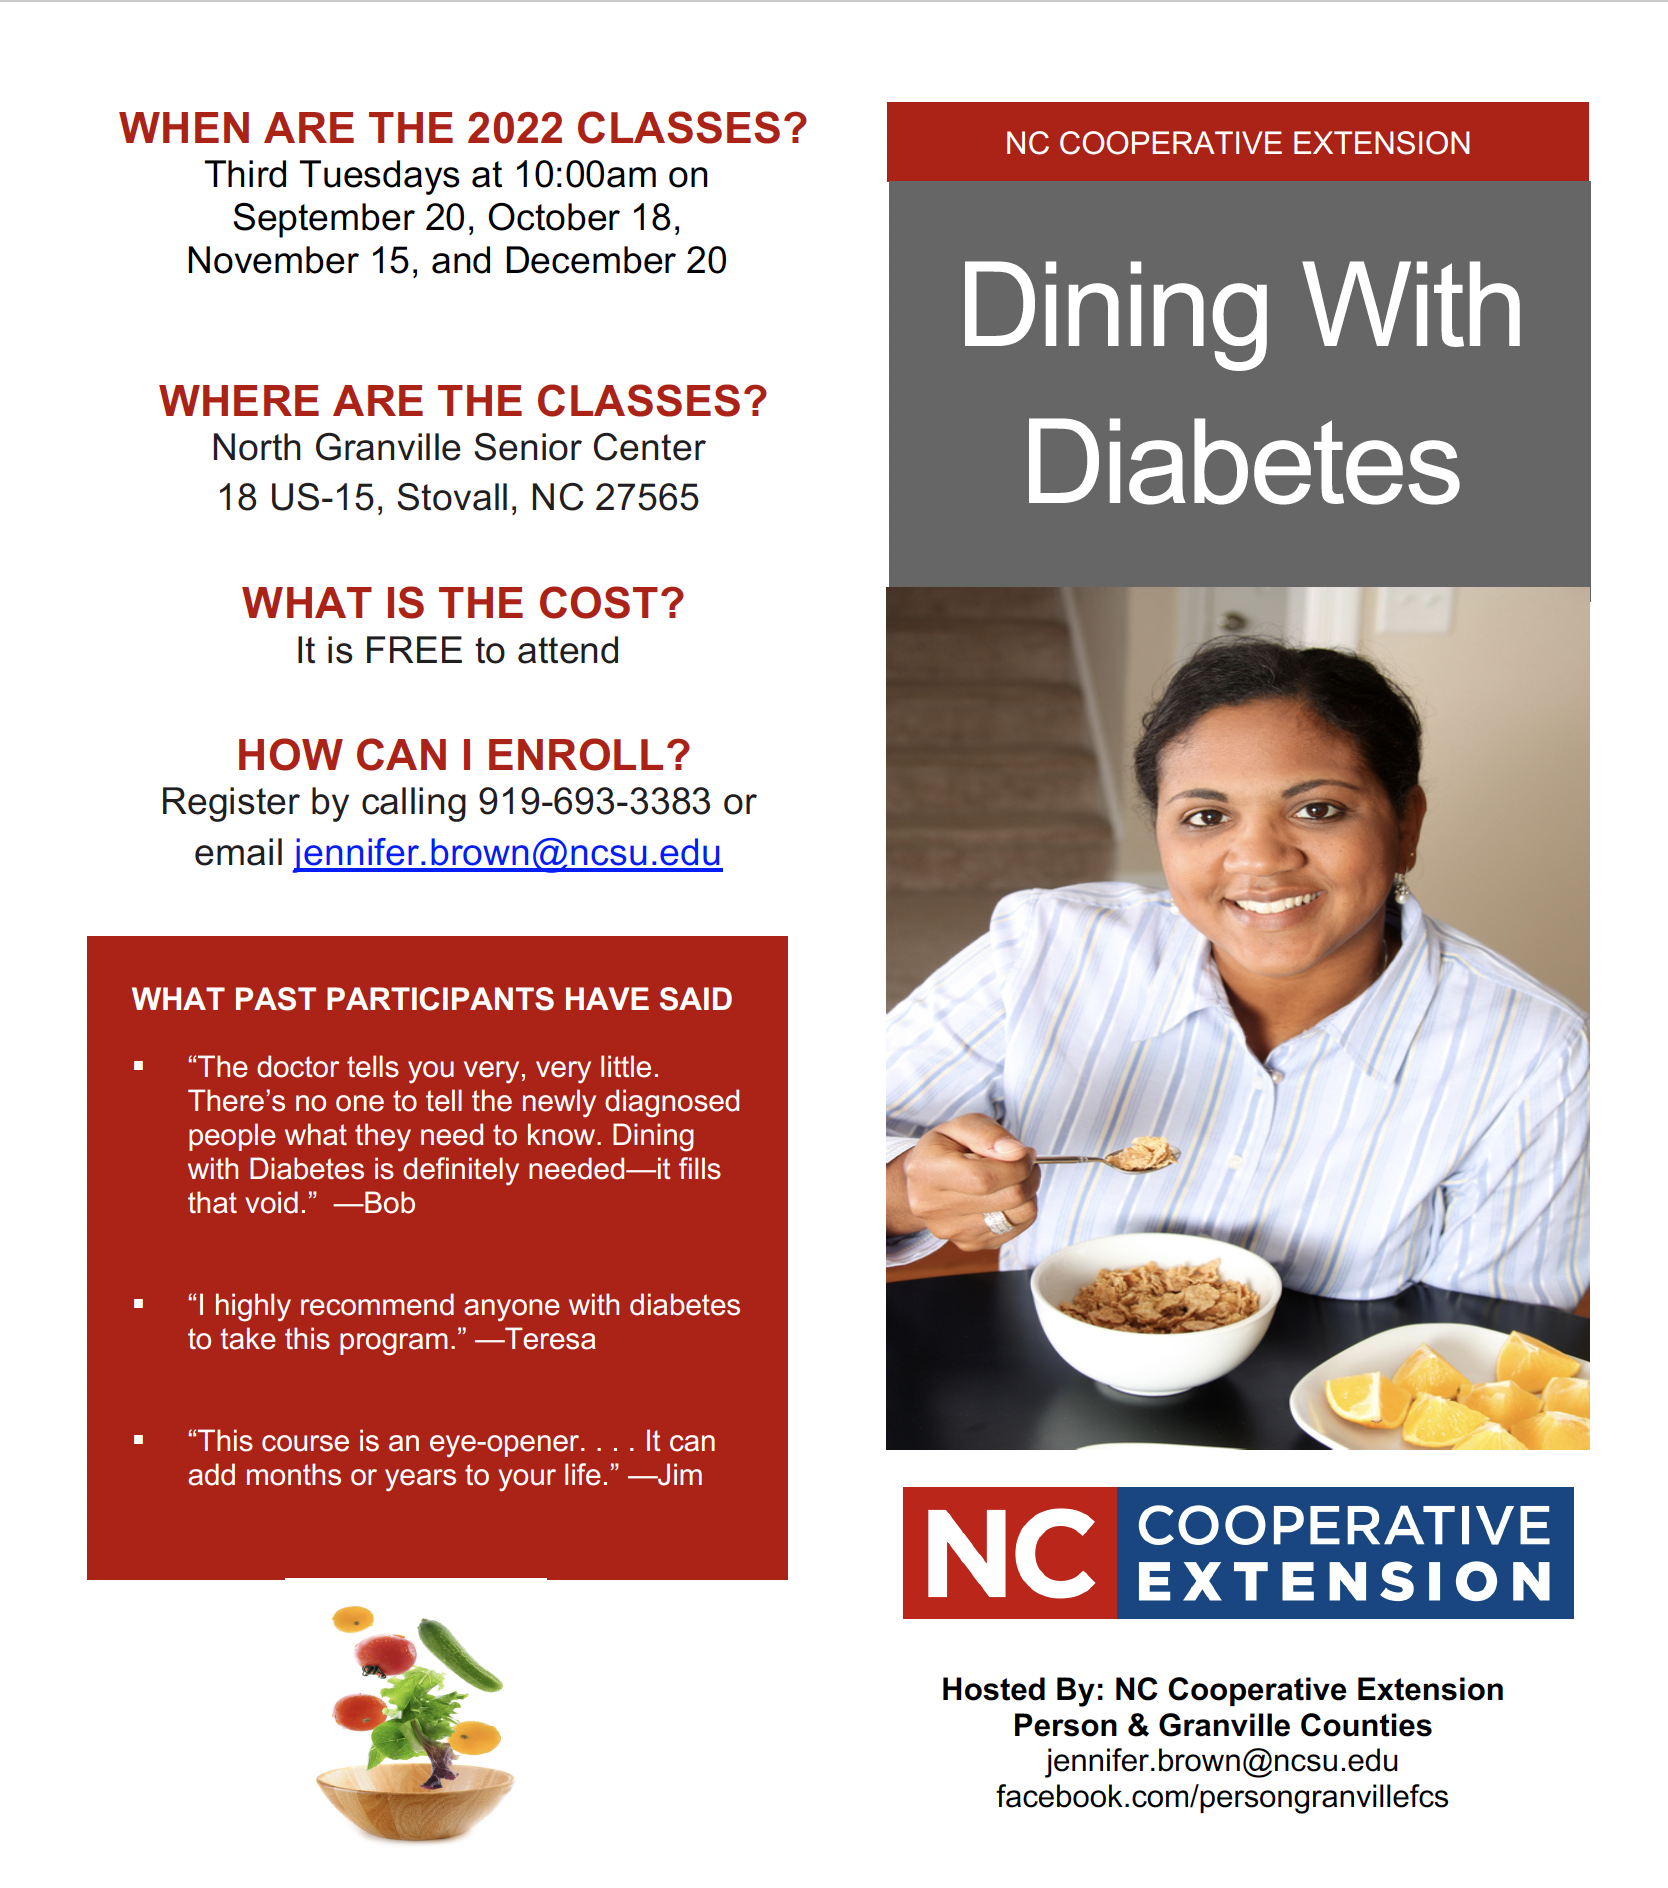 Dining with Diabetes Flyer.